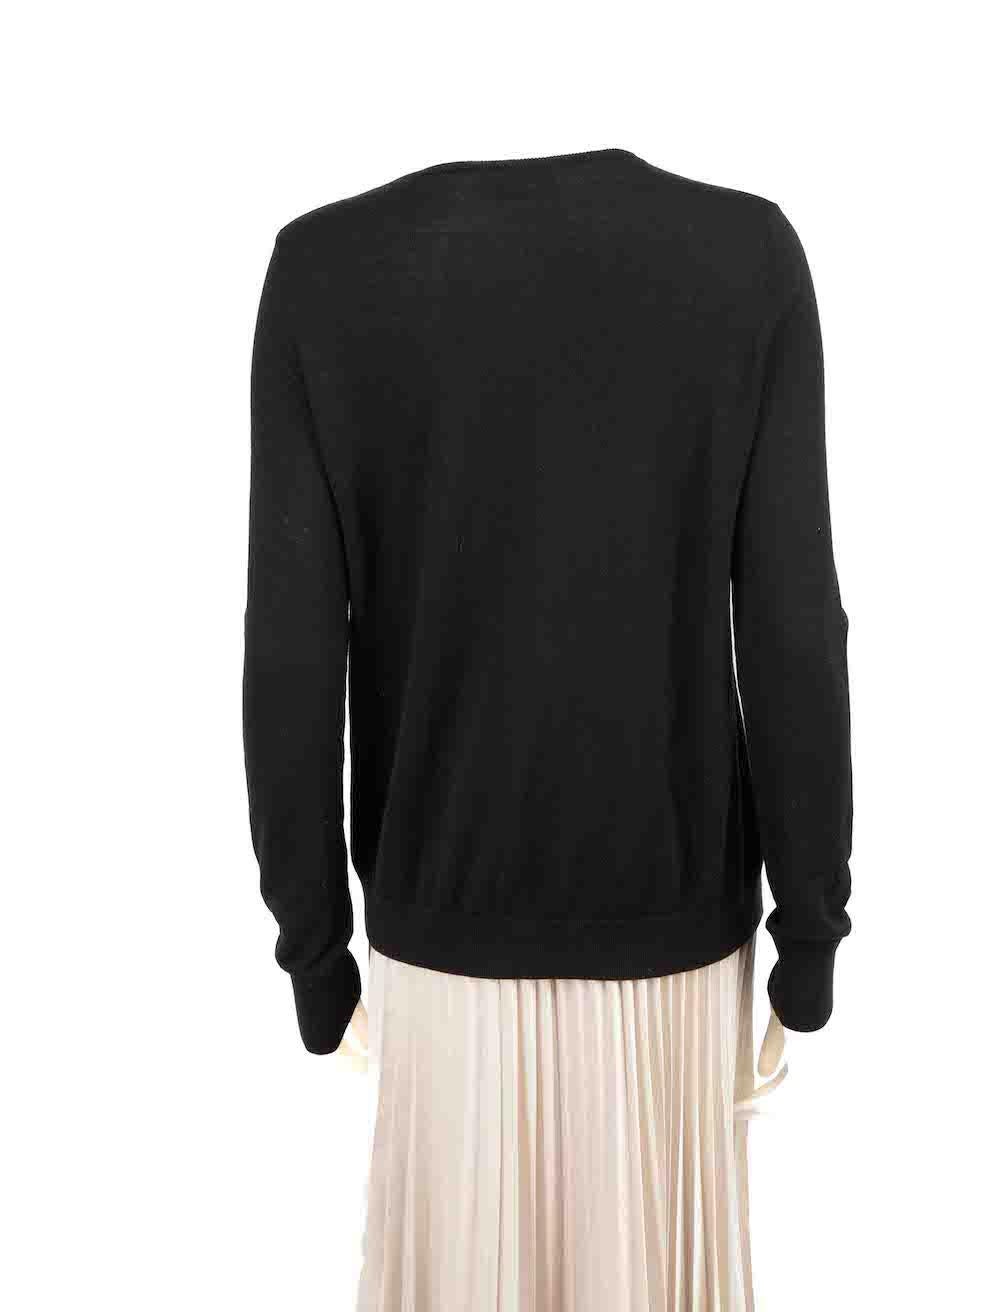 Vince Black Wool Knit Leather Panel Long Sleeve Top Size L In Good Condition For Sale In London, GB